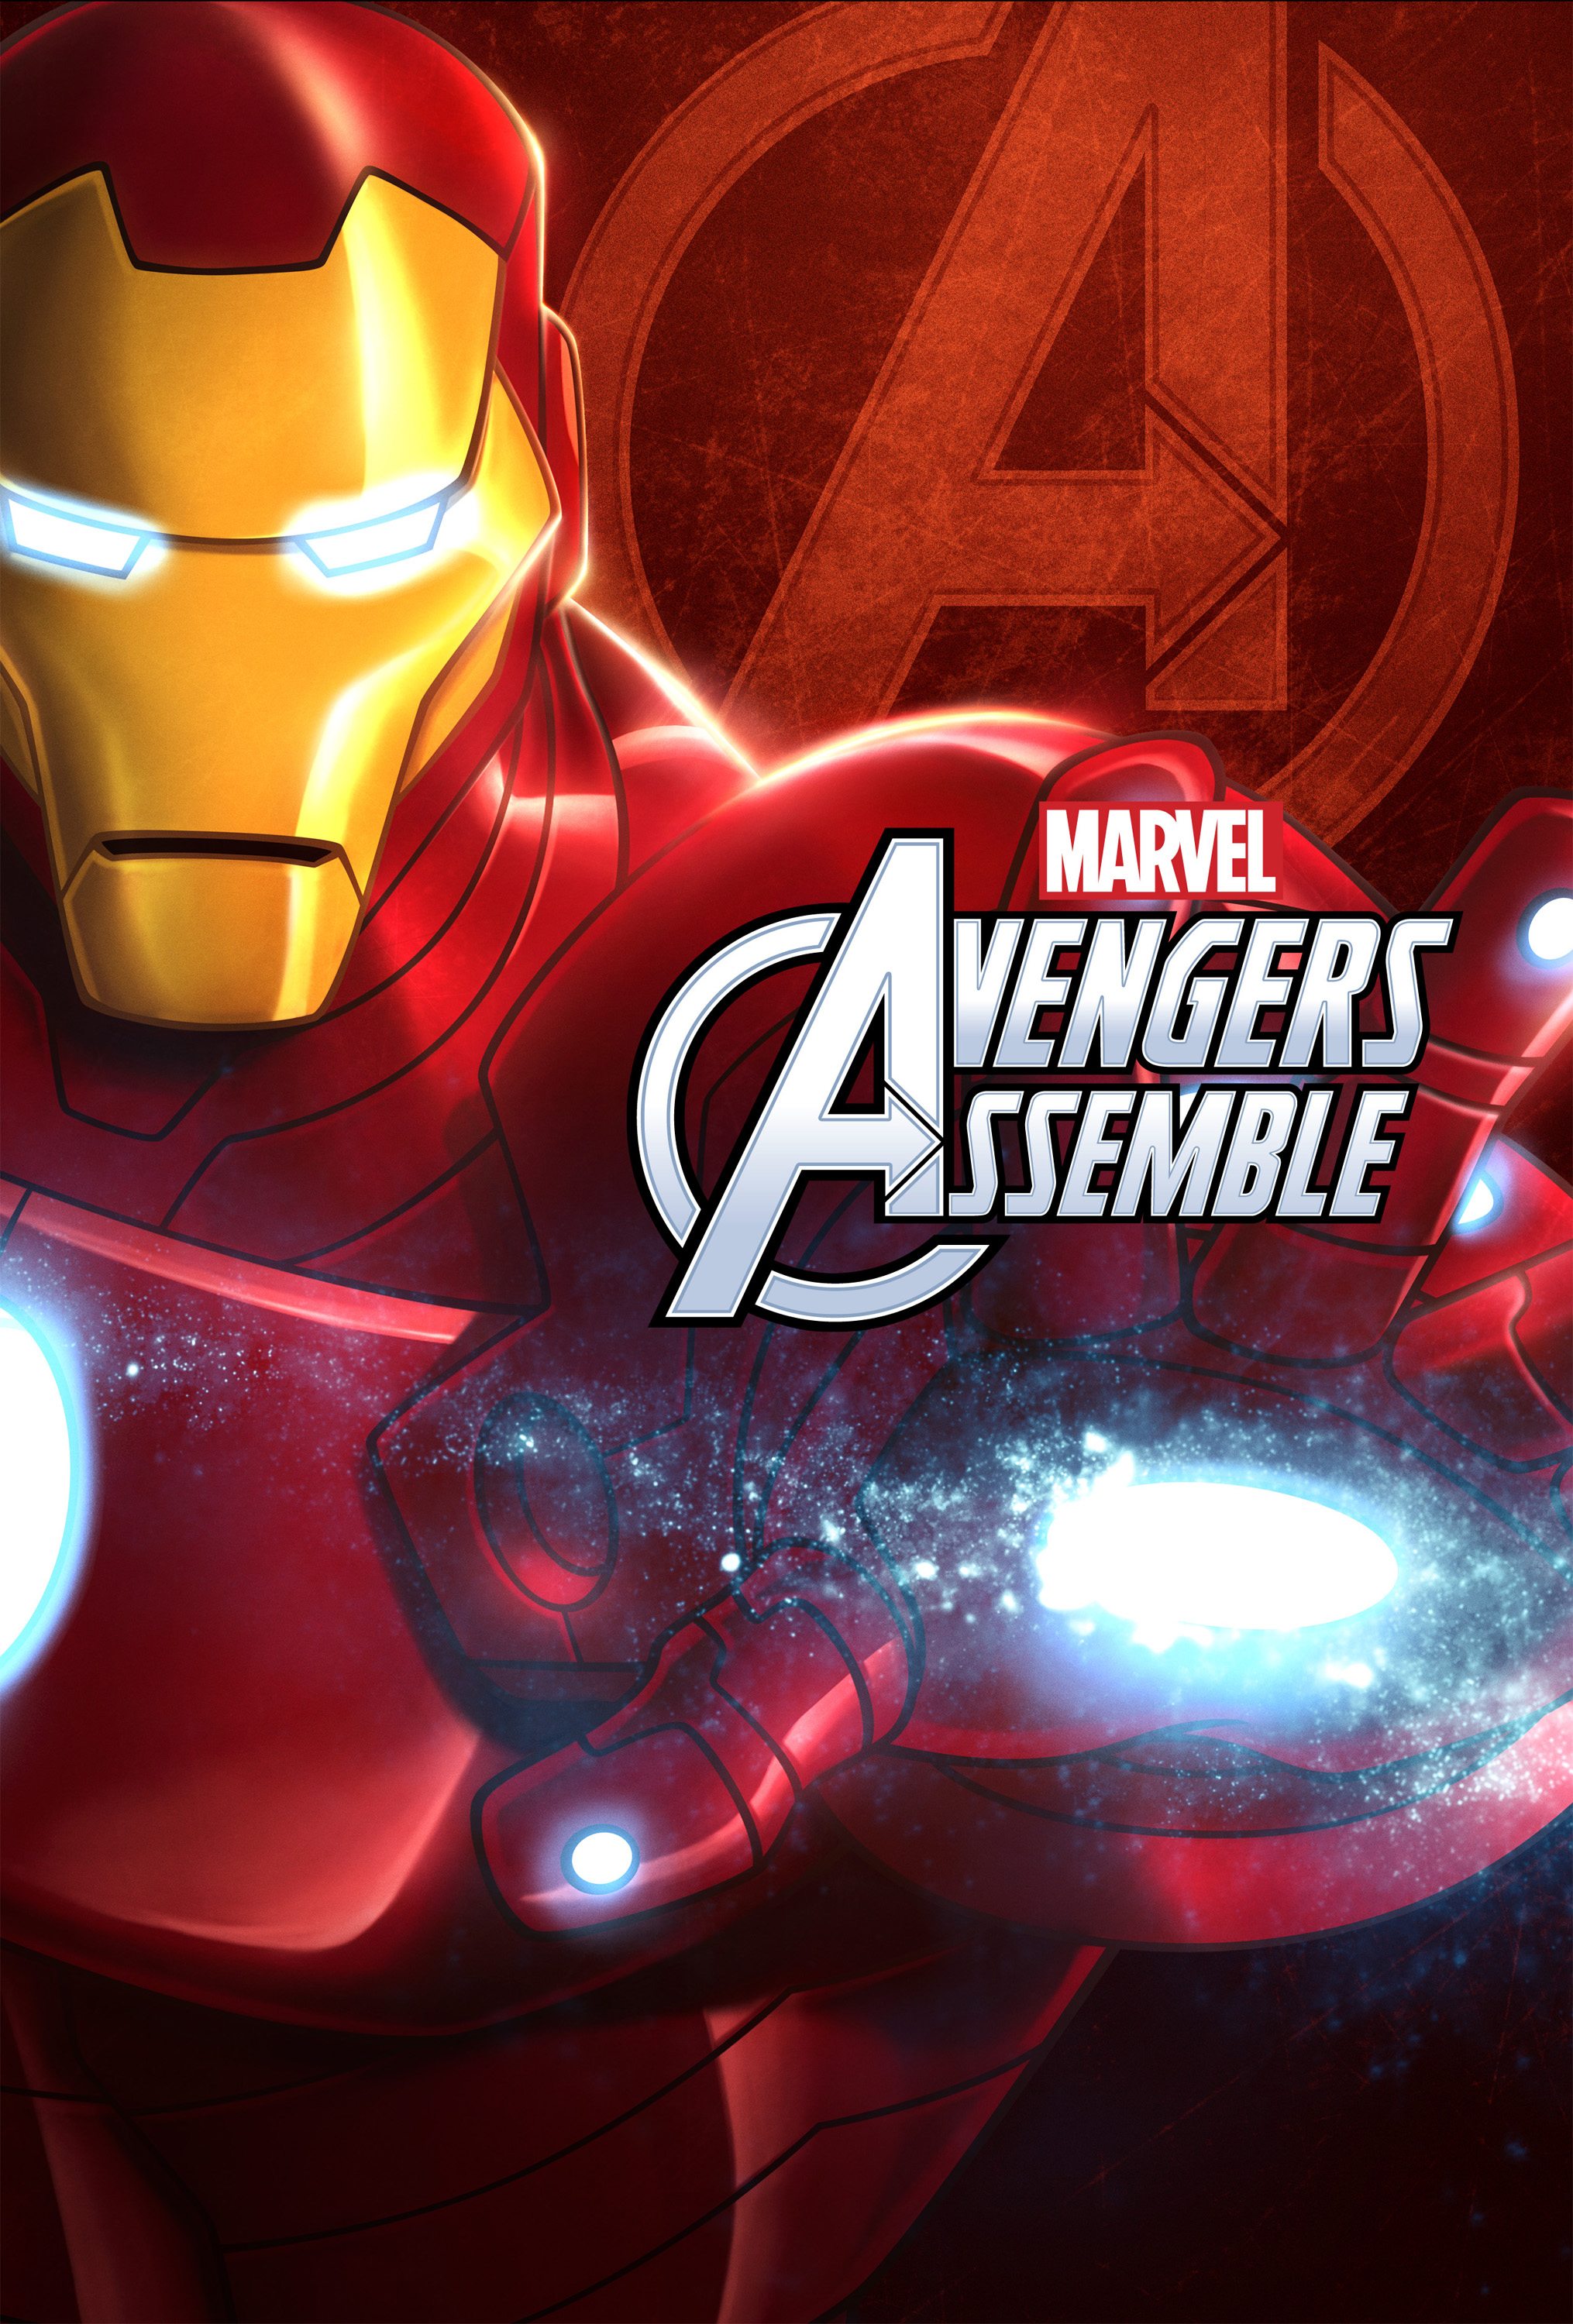 Marvel Avengers Assemble Special Preview Sunday on Disney XD - With  Exclusive Images! - GeekDad